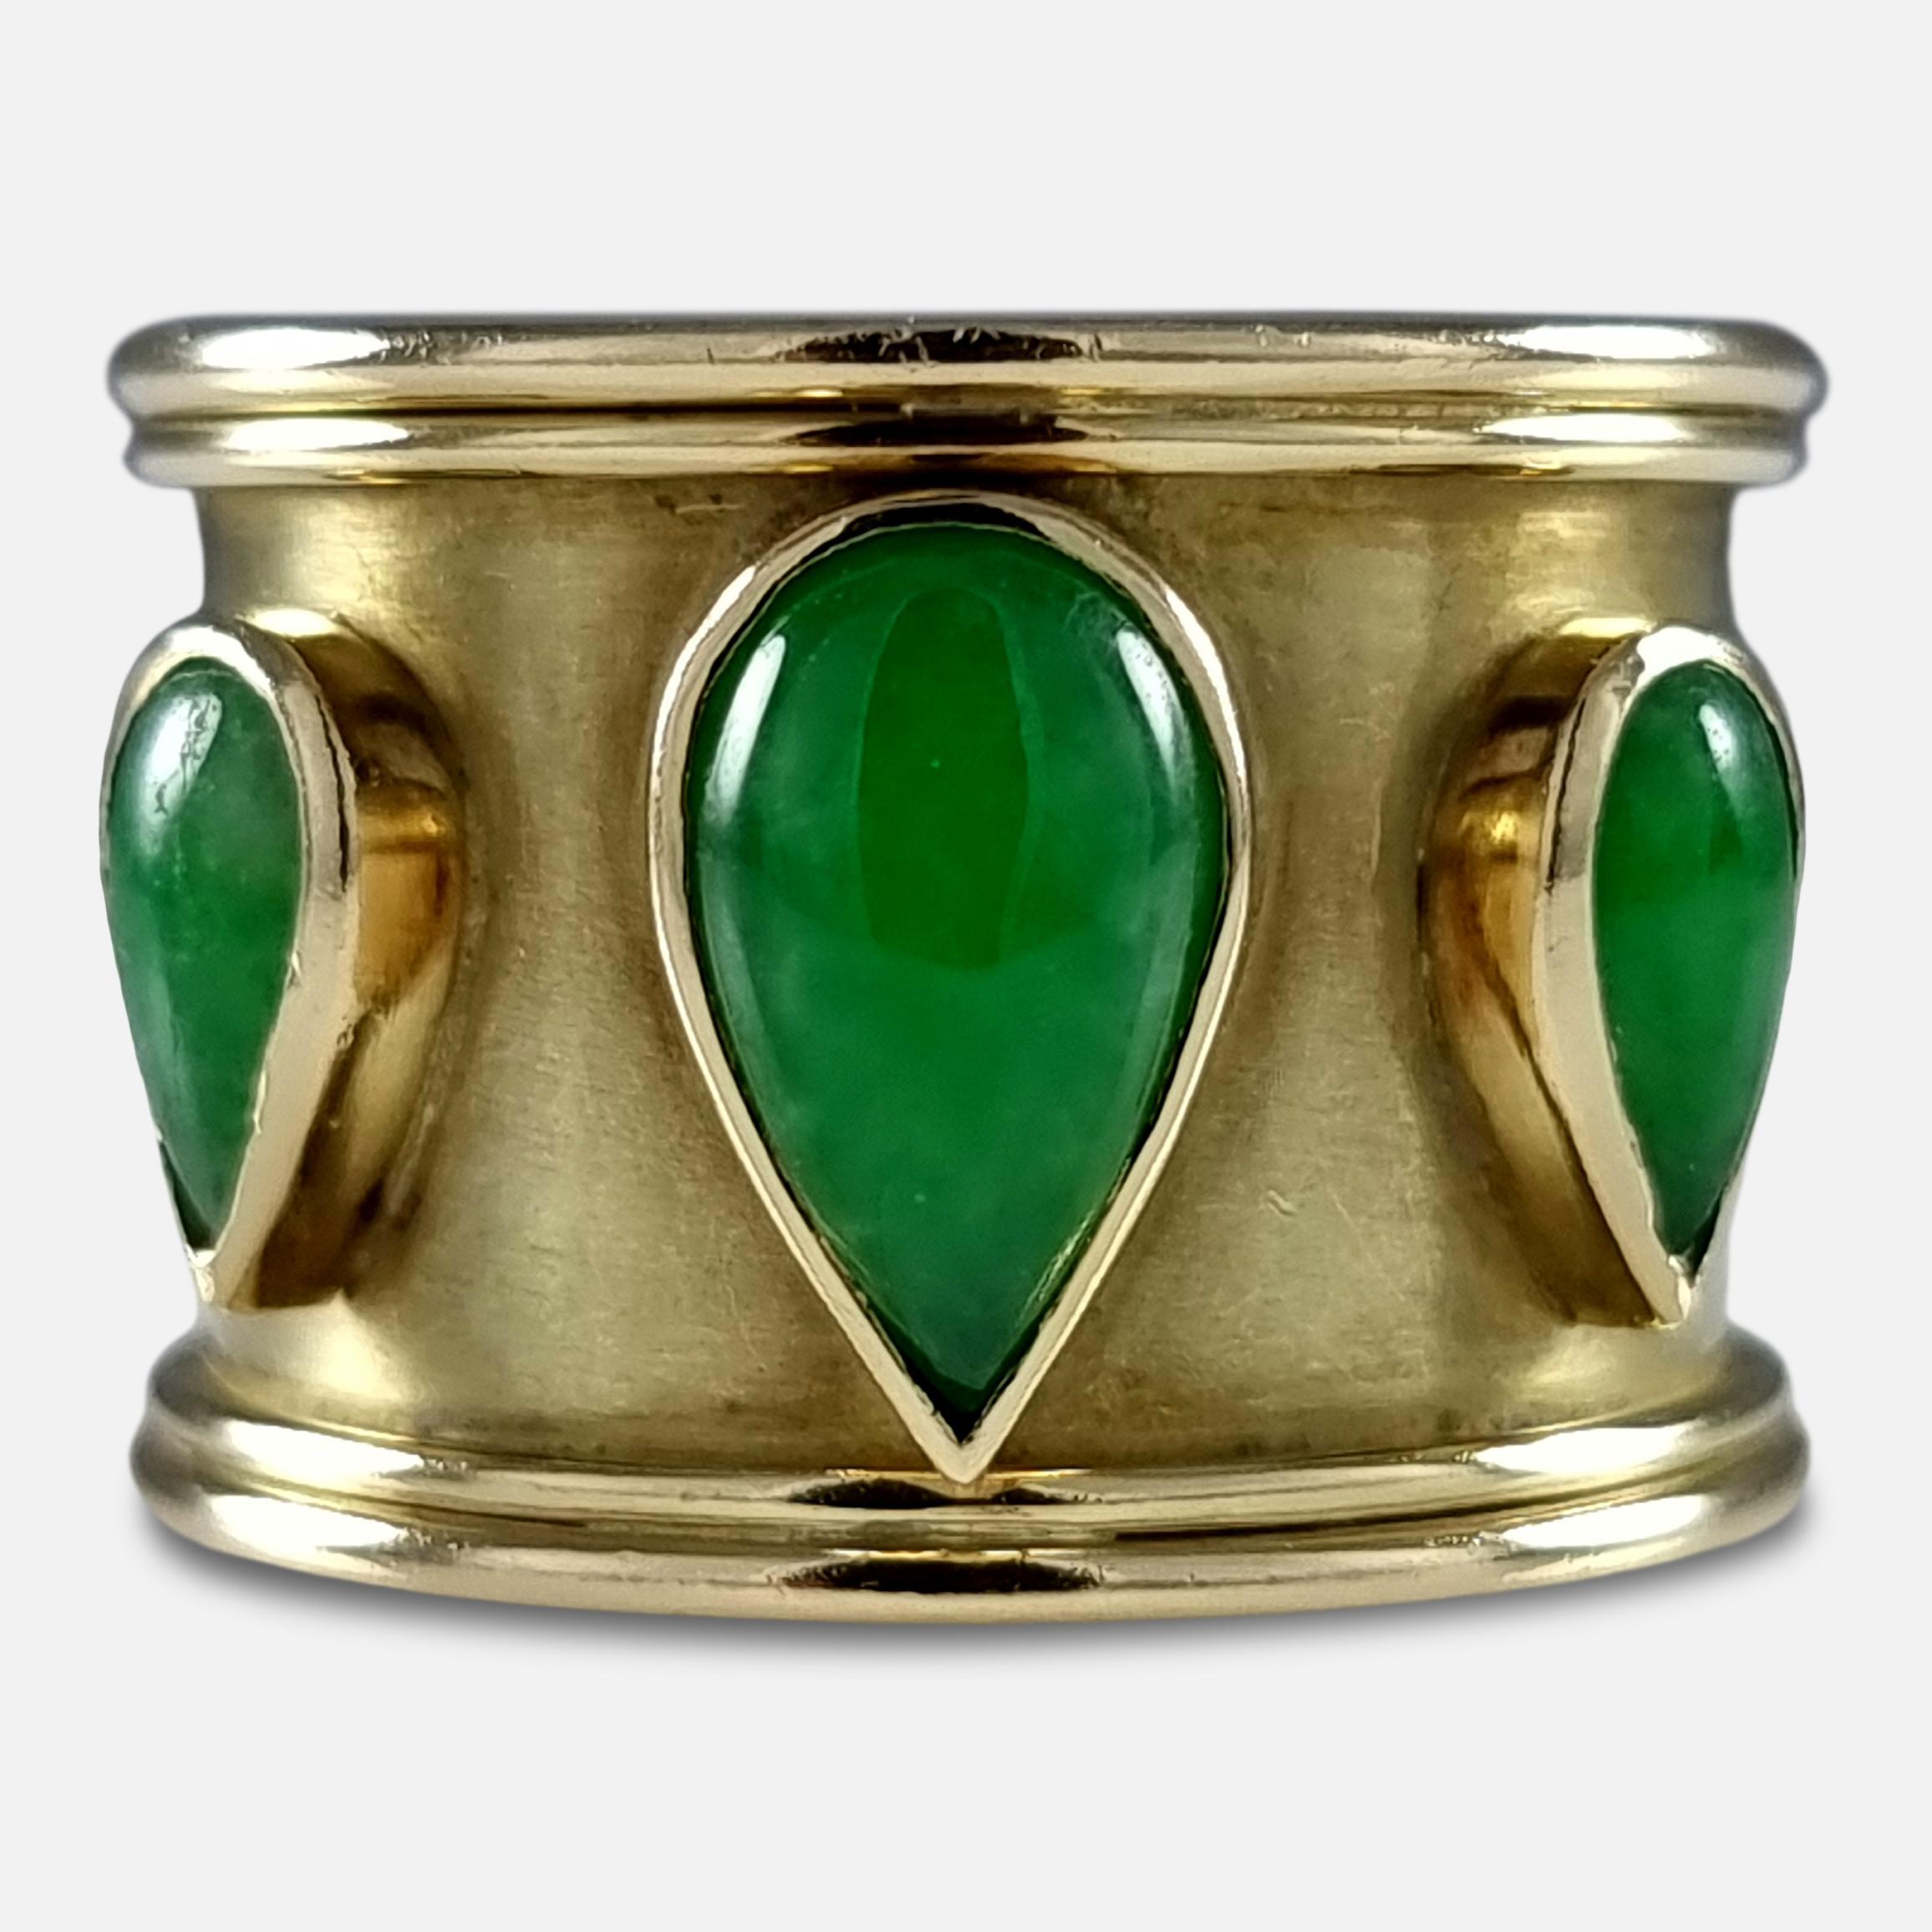 An Elizabeth II 18ct yellow gold nephrite jade ring. The wide gold band is set with three pear-shaped green nephrite jade cabochons

The ring is hallmarked with London marks, '750' for 18 carat gold, and date letter 'S' to denote 1992.

Assay: -